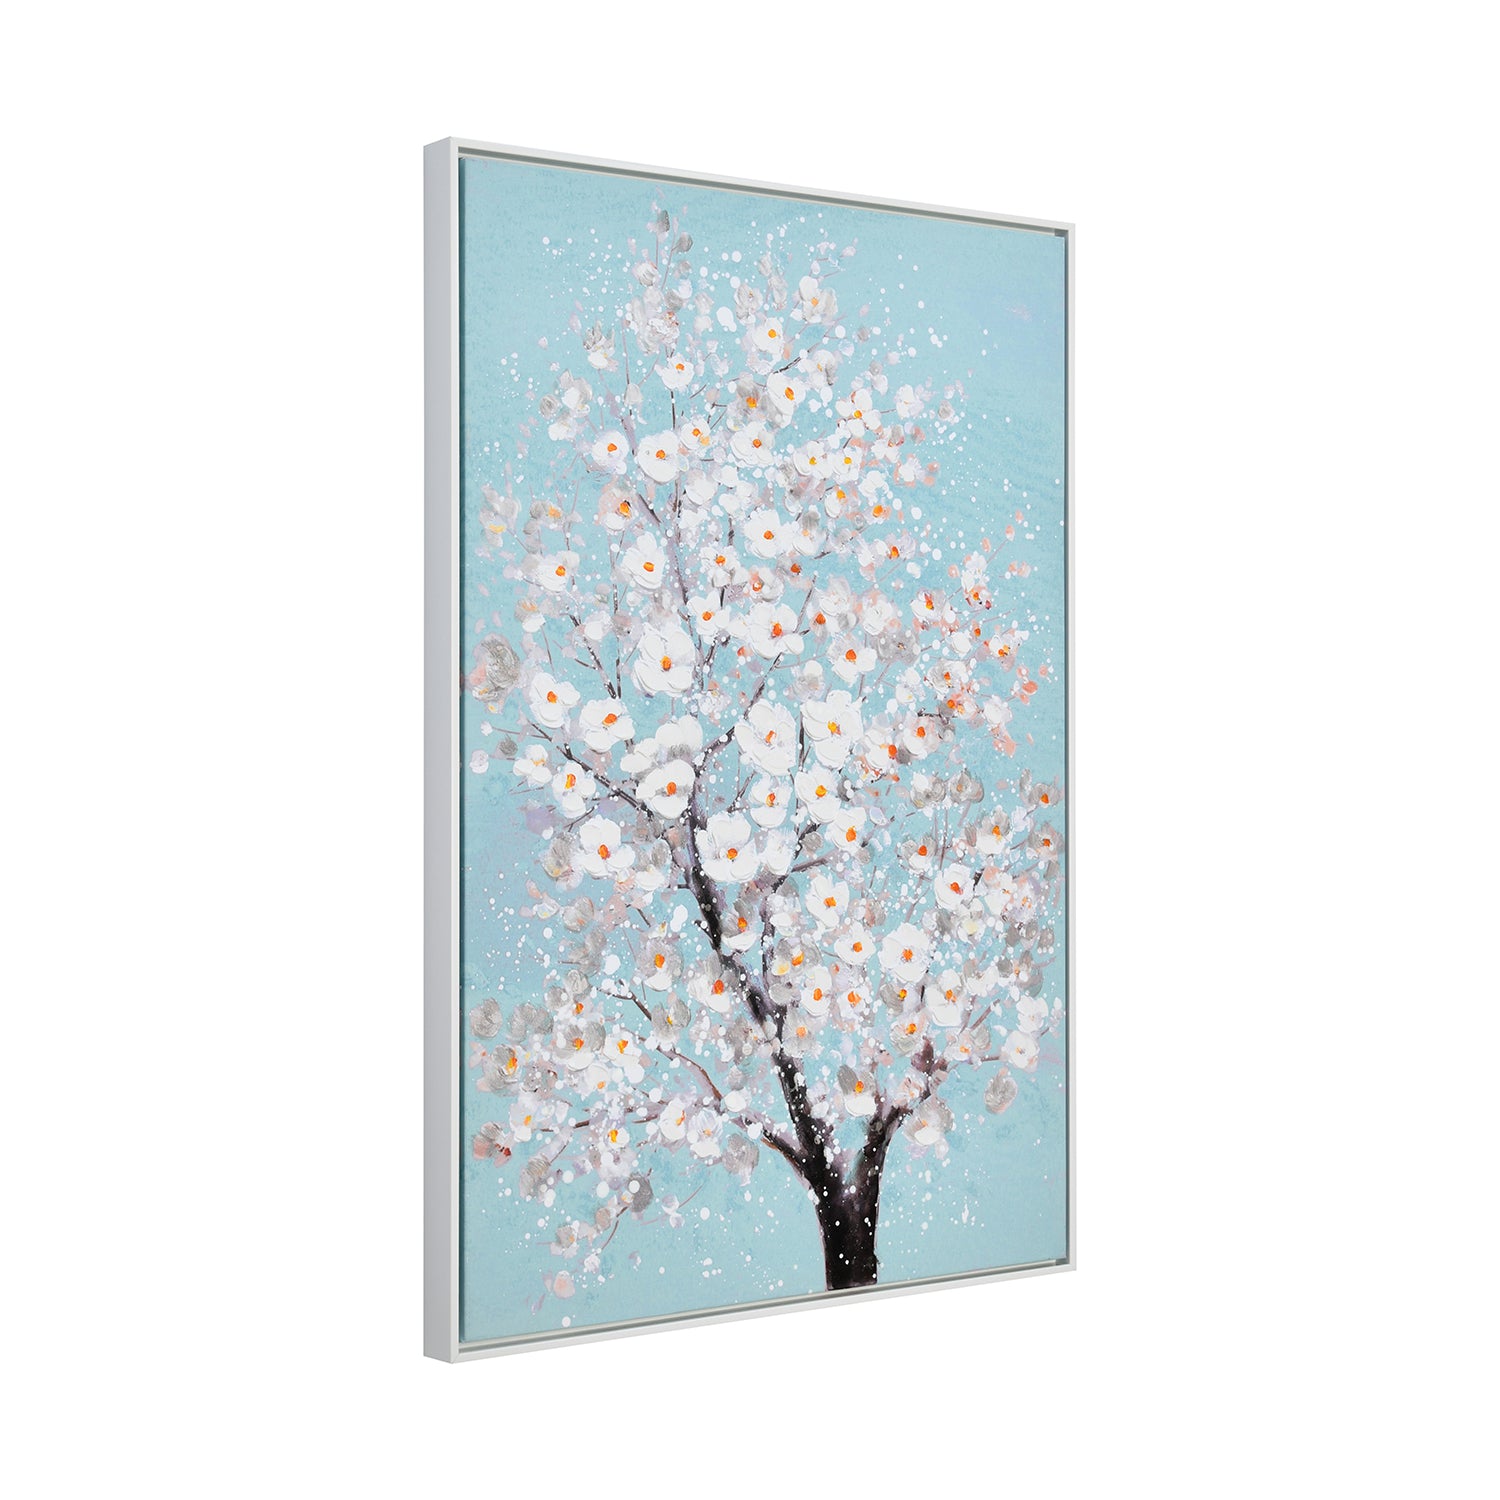 Floral Tree Canvas Wall Painting (Sea Green & White)